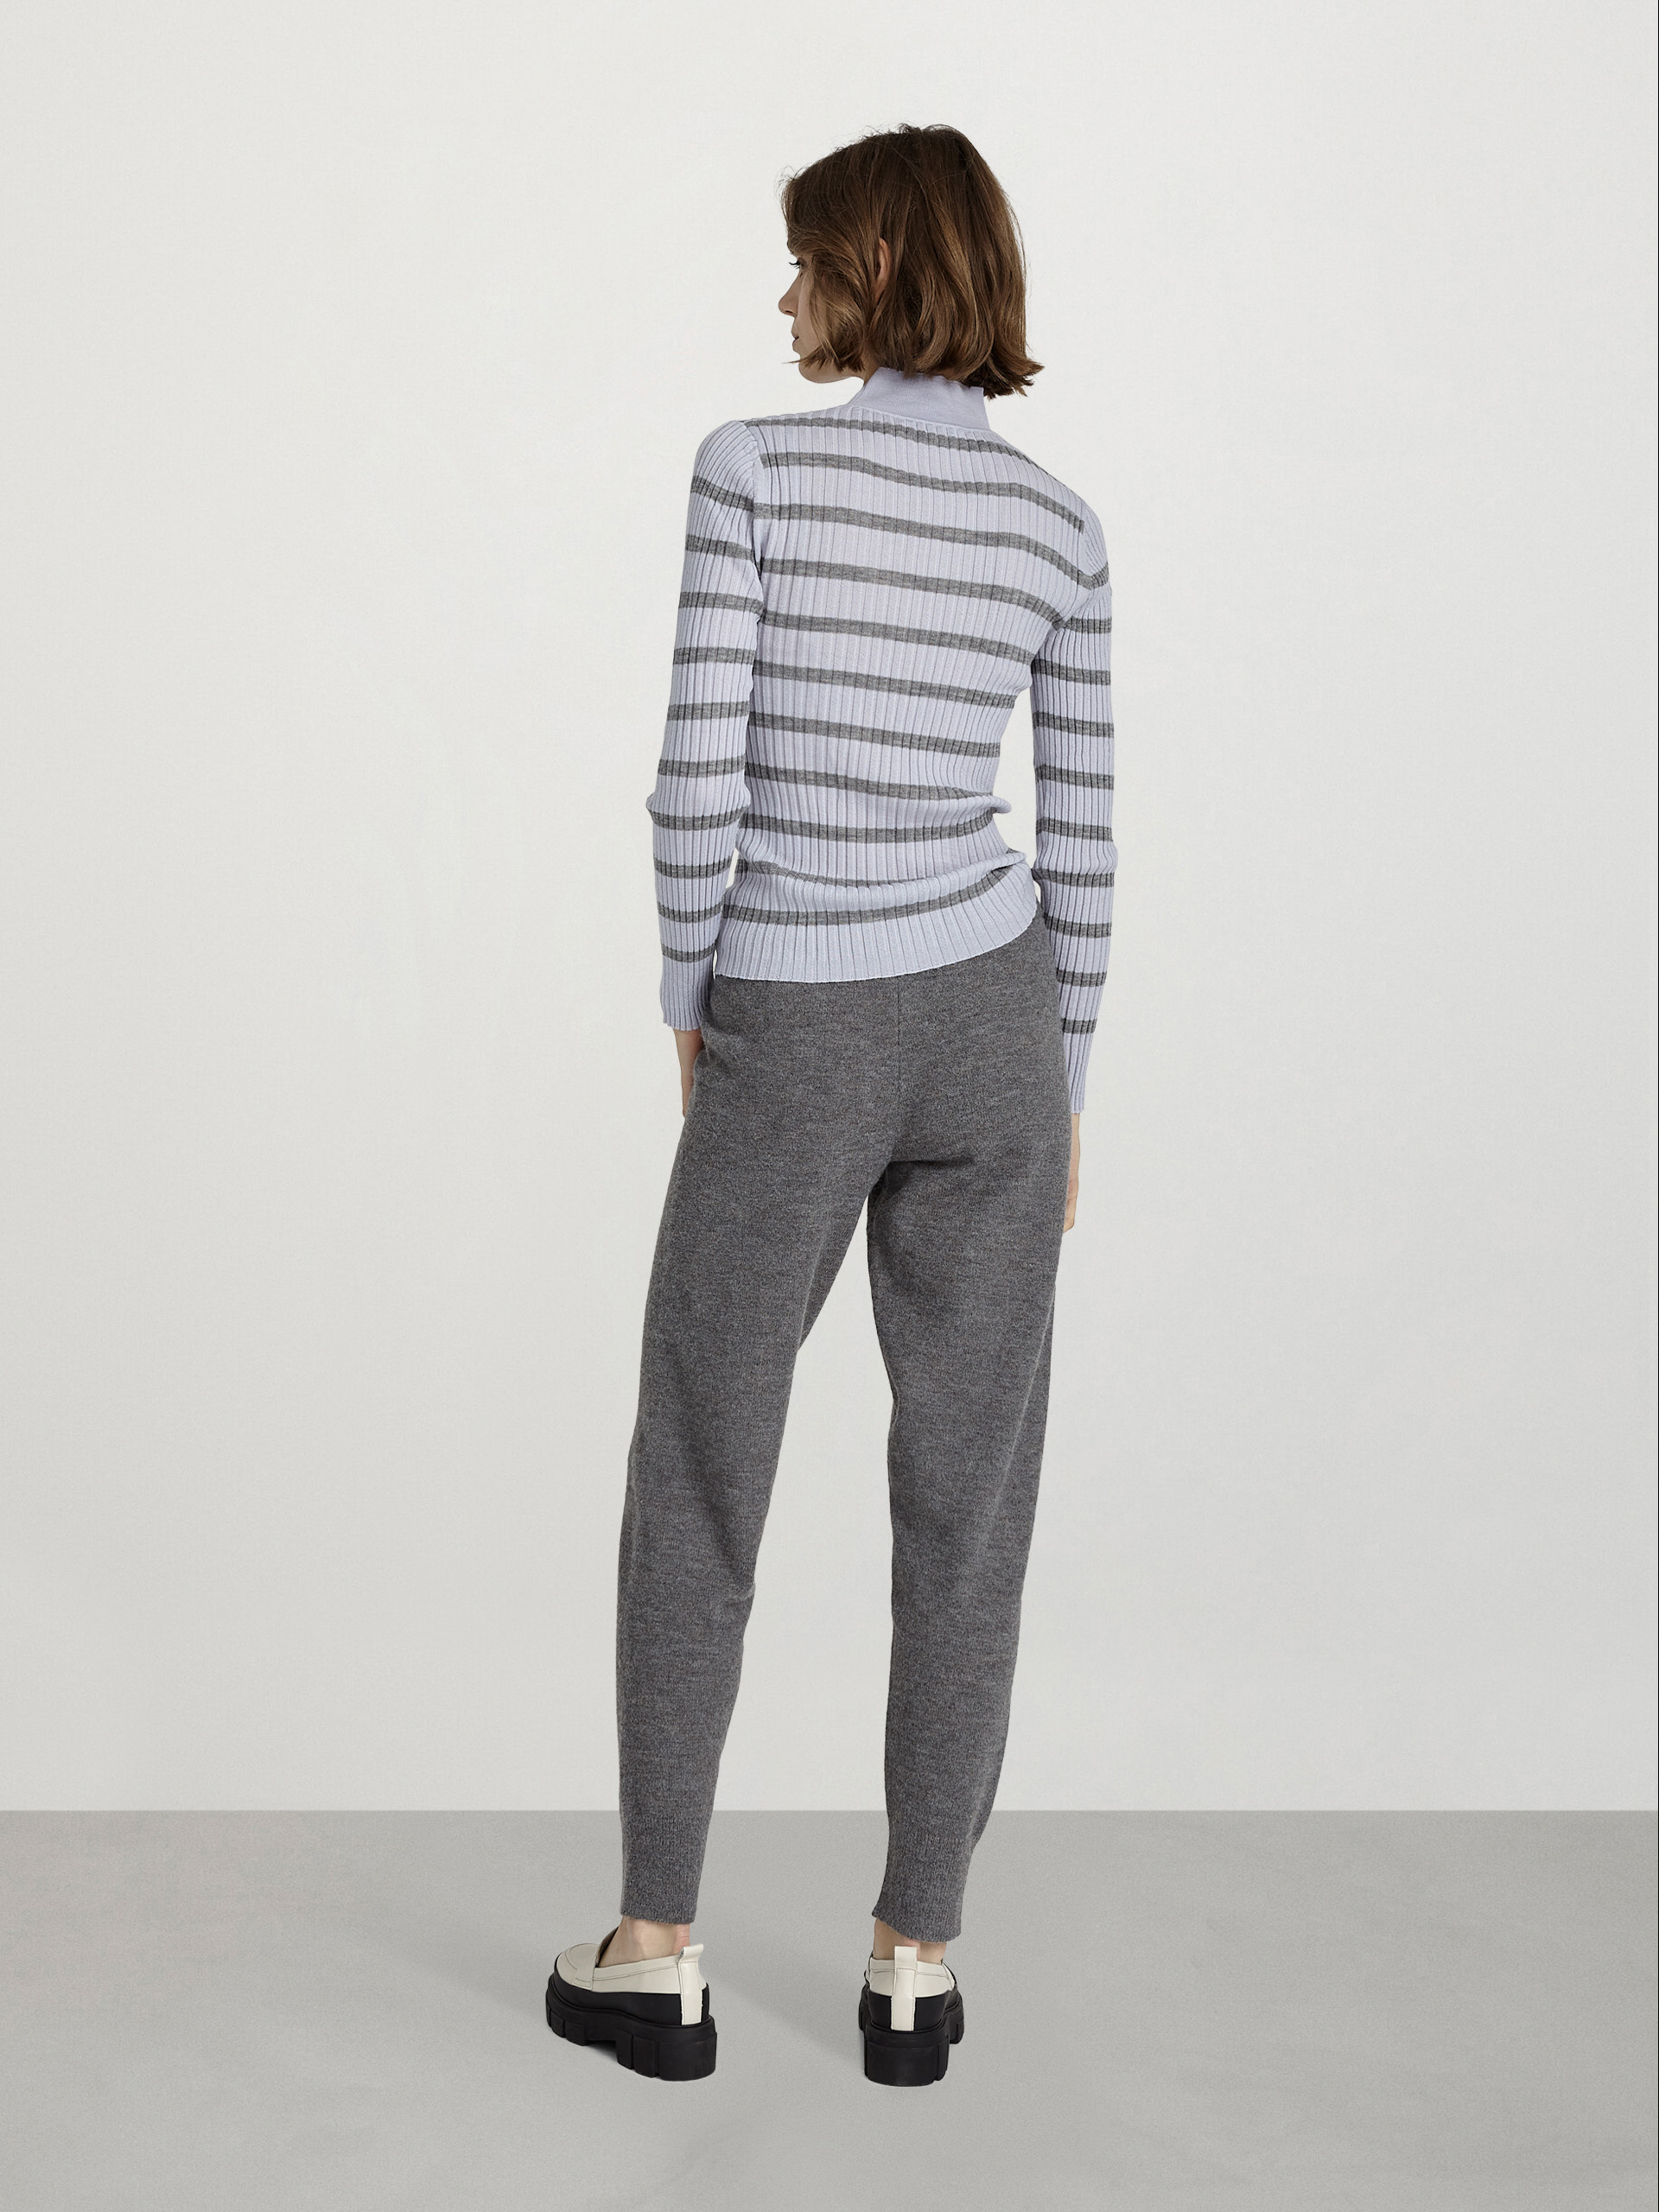 Cynthia Rowley Trousers & Pants sale - discounted price | FASHIOLA.in